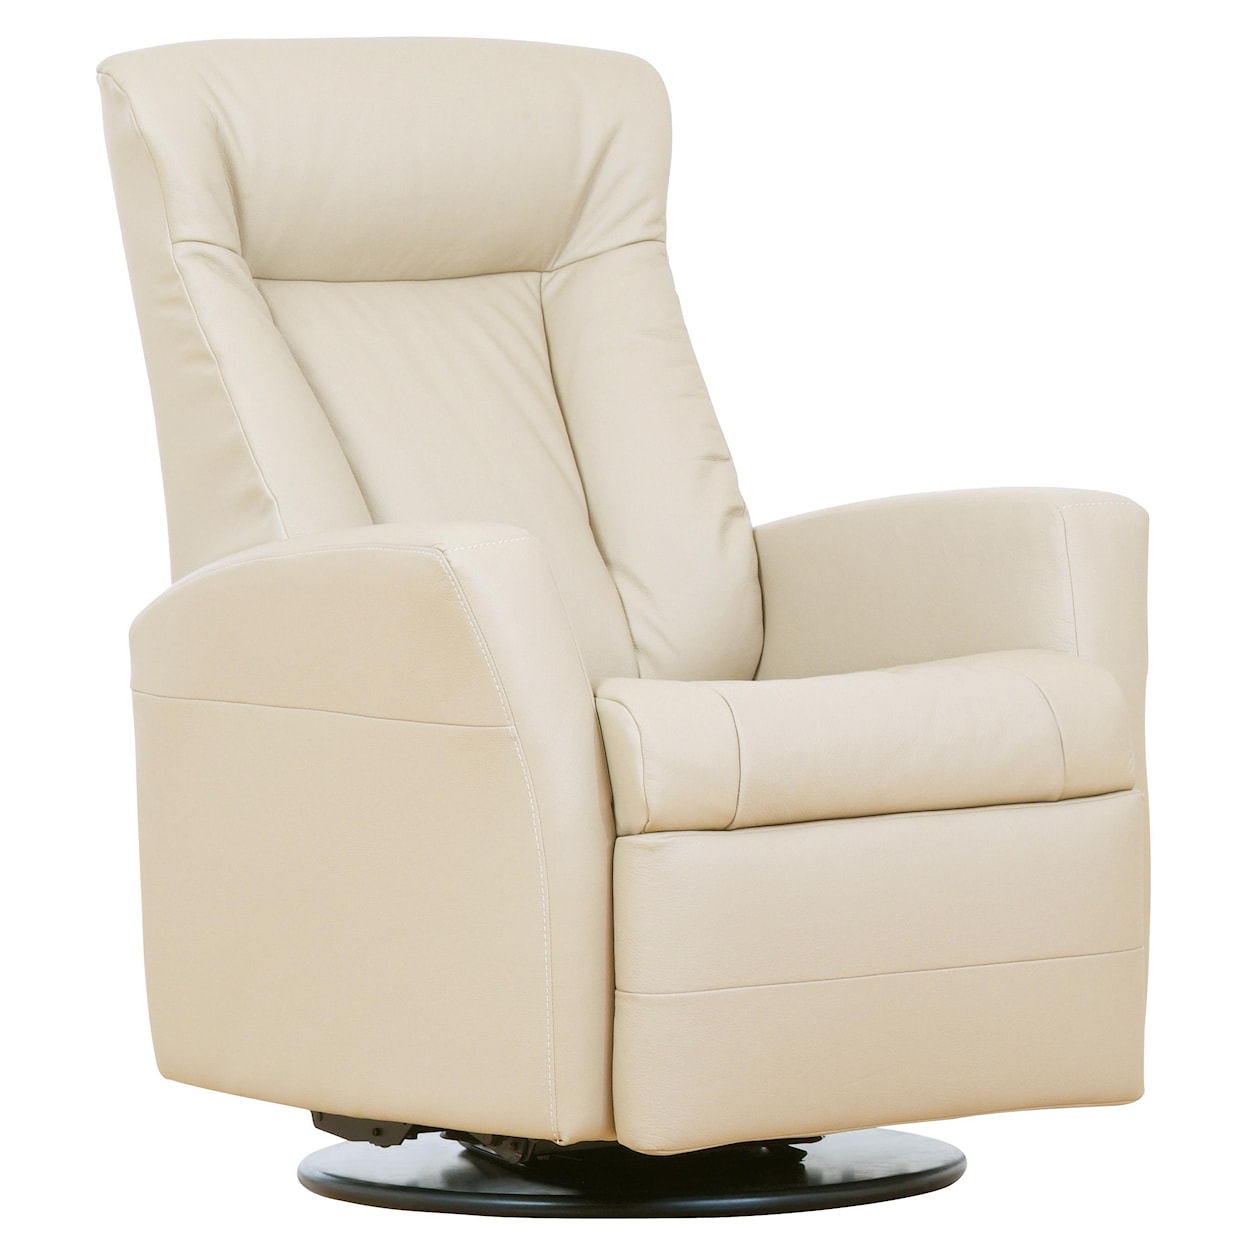 IMG Norway Prince  Prince Relaxer Recliner in Standard Size